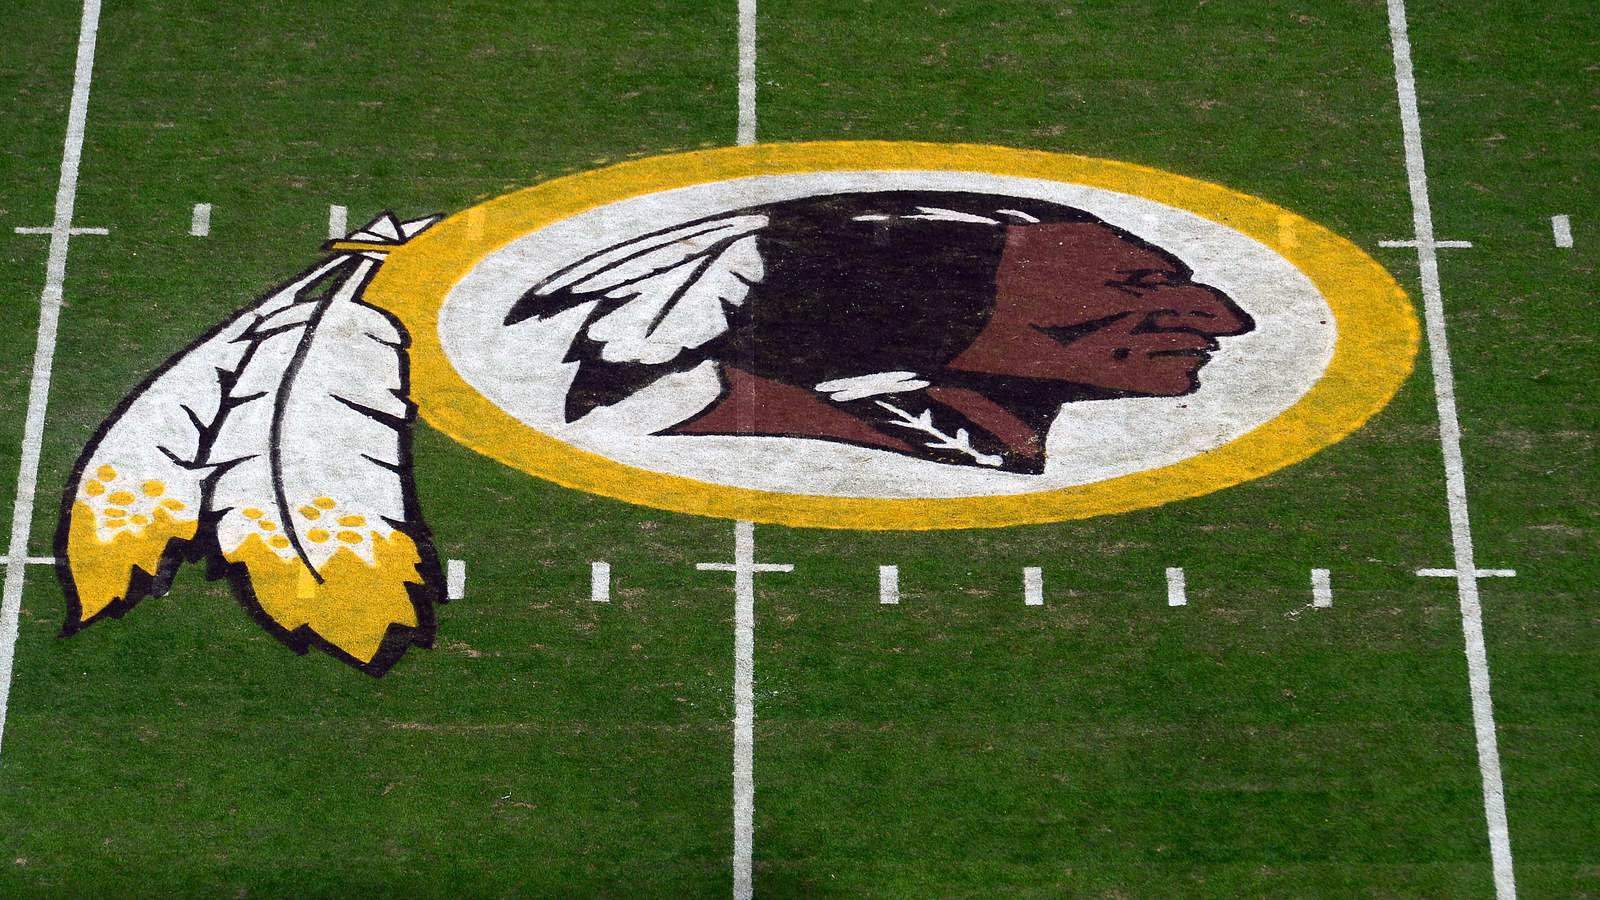 Not Redskins but Washington Football Team, for now